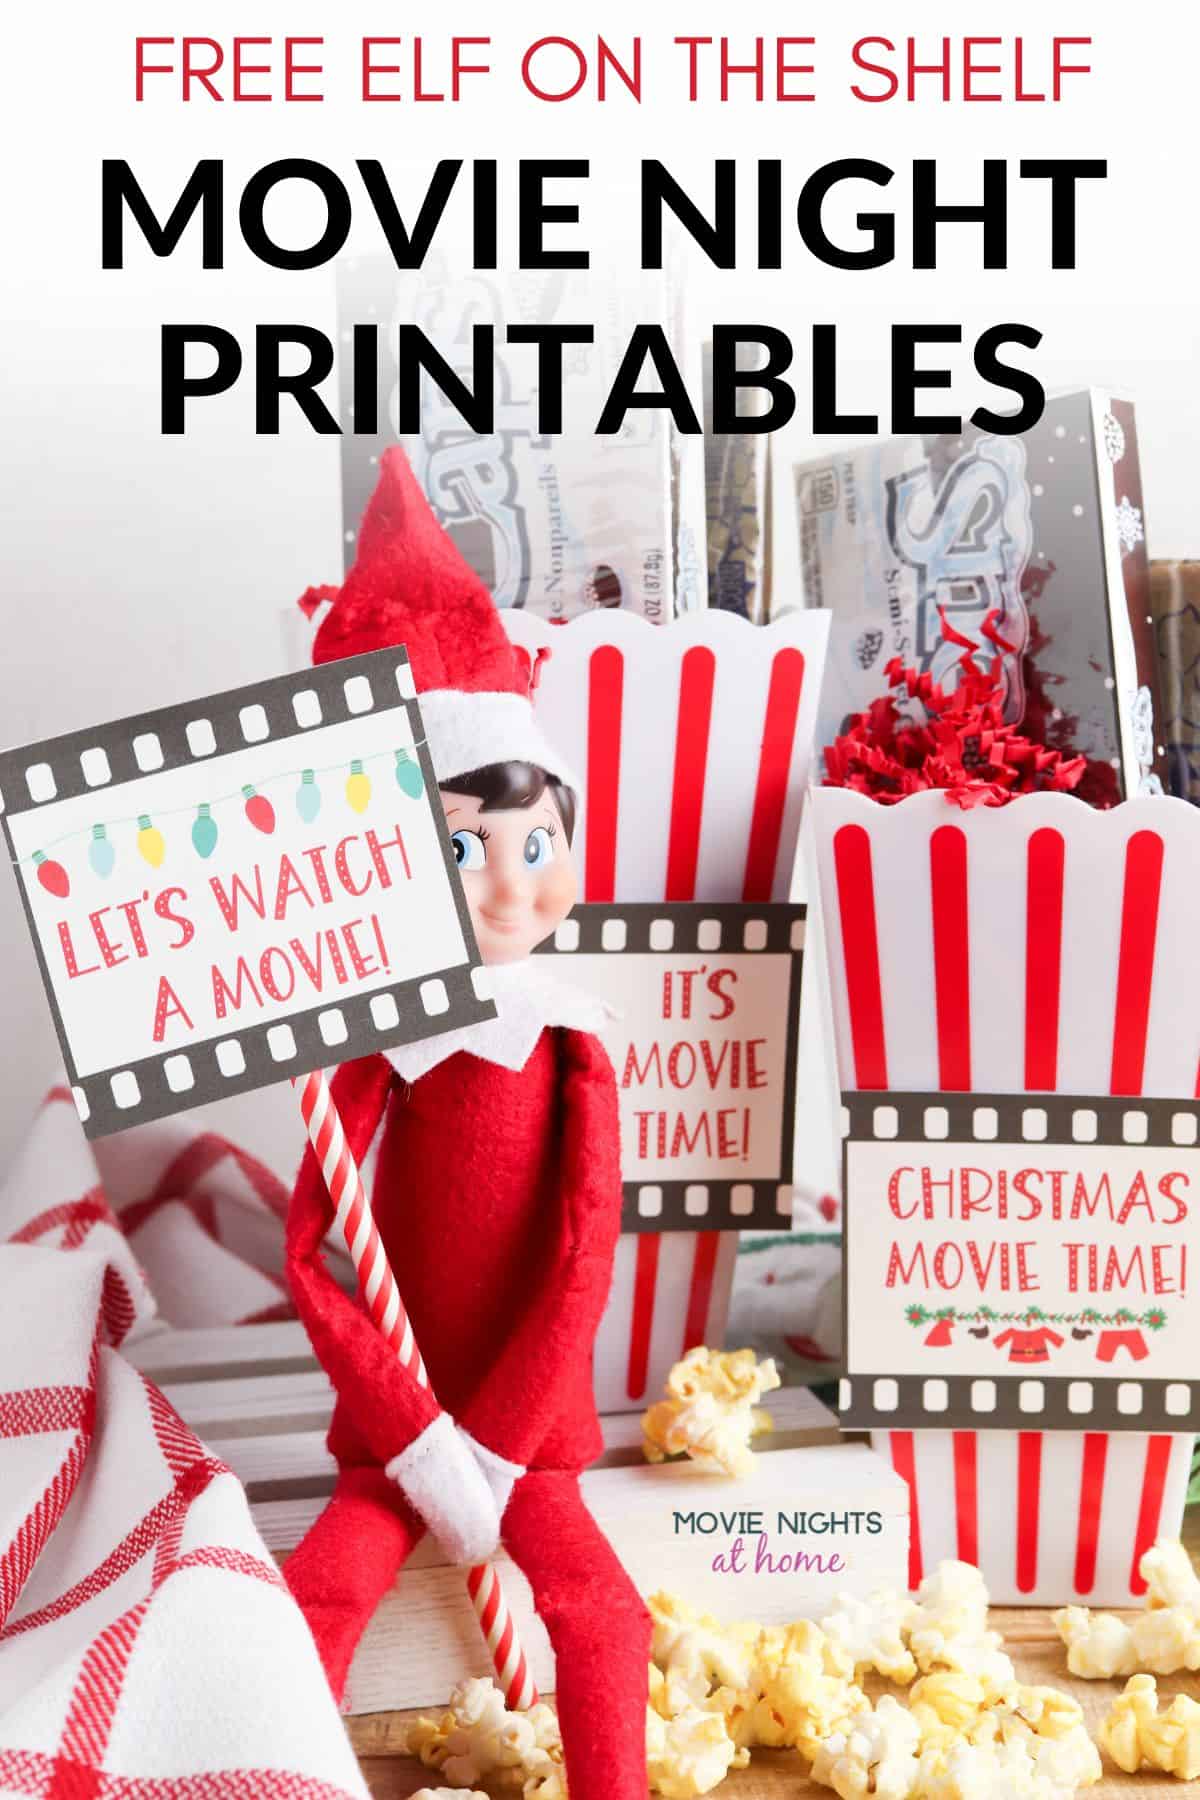 Elf on the Shelf holding a "lets watch a movie!" sign - text overlay Free Elf on the Shelf Movie Night Printables